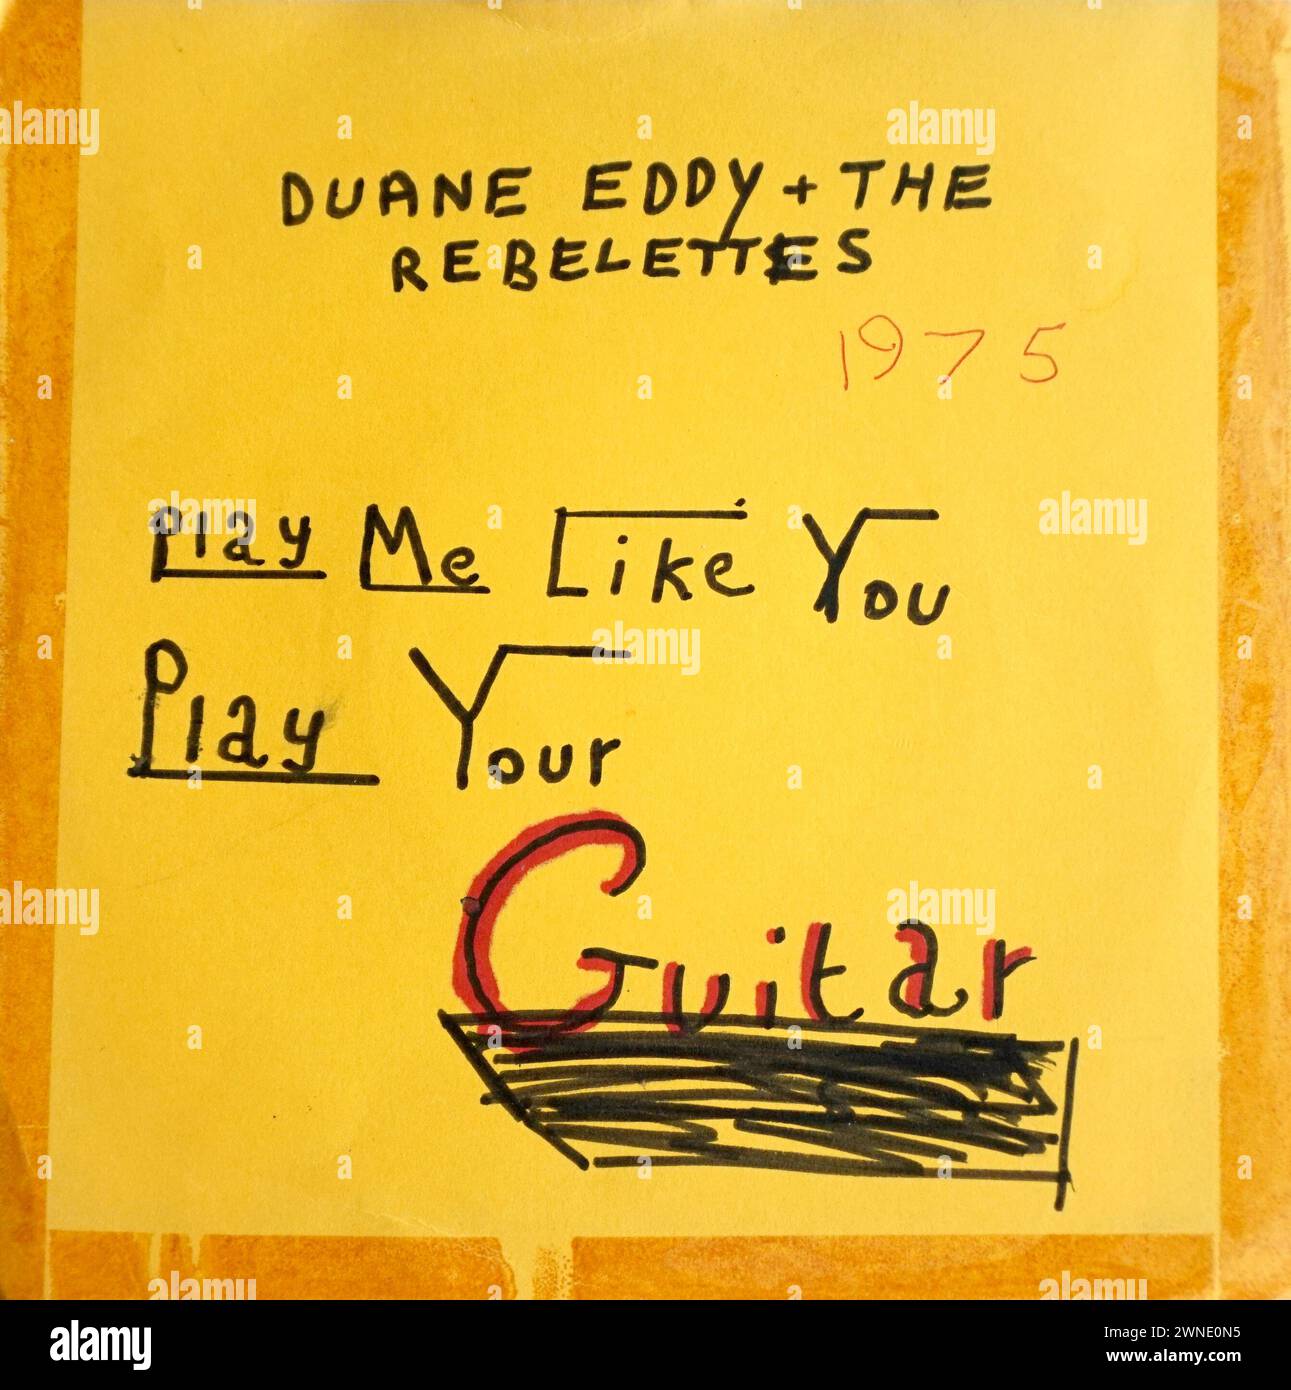 Home made 7' single sleeve 1970s, Duane Eddy. Sleeve made by teenager at home on card, sellotaped together, and title typed on. Social history, music memorabilia, Stock Photo